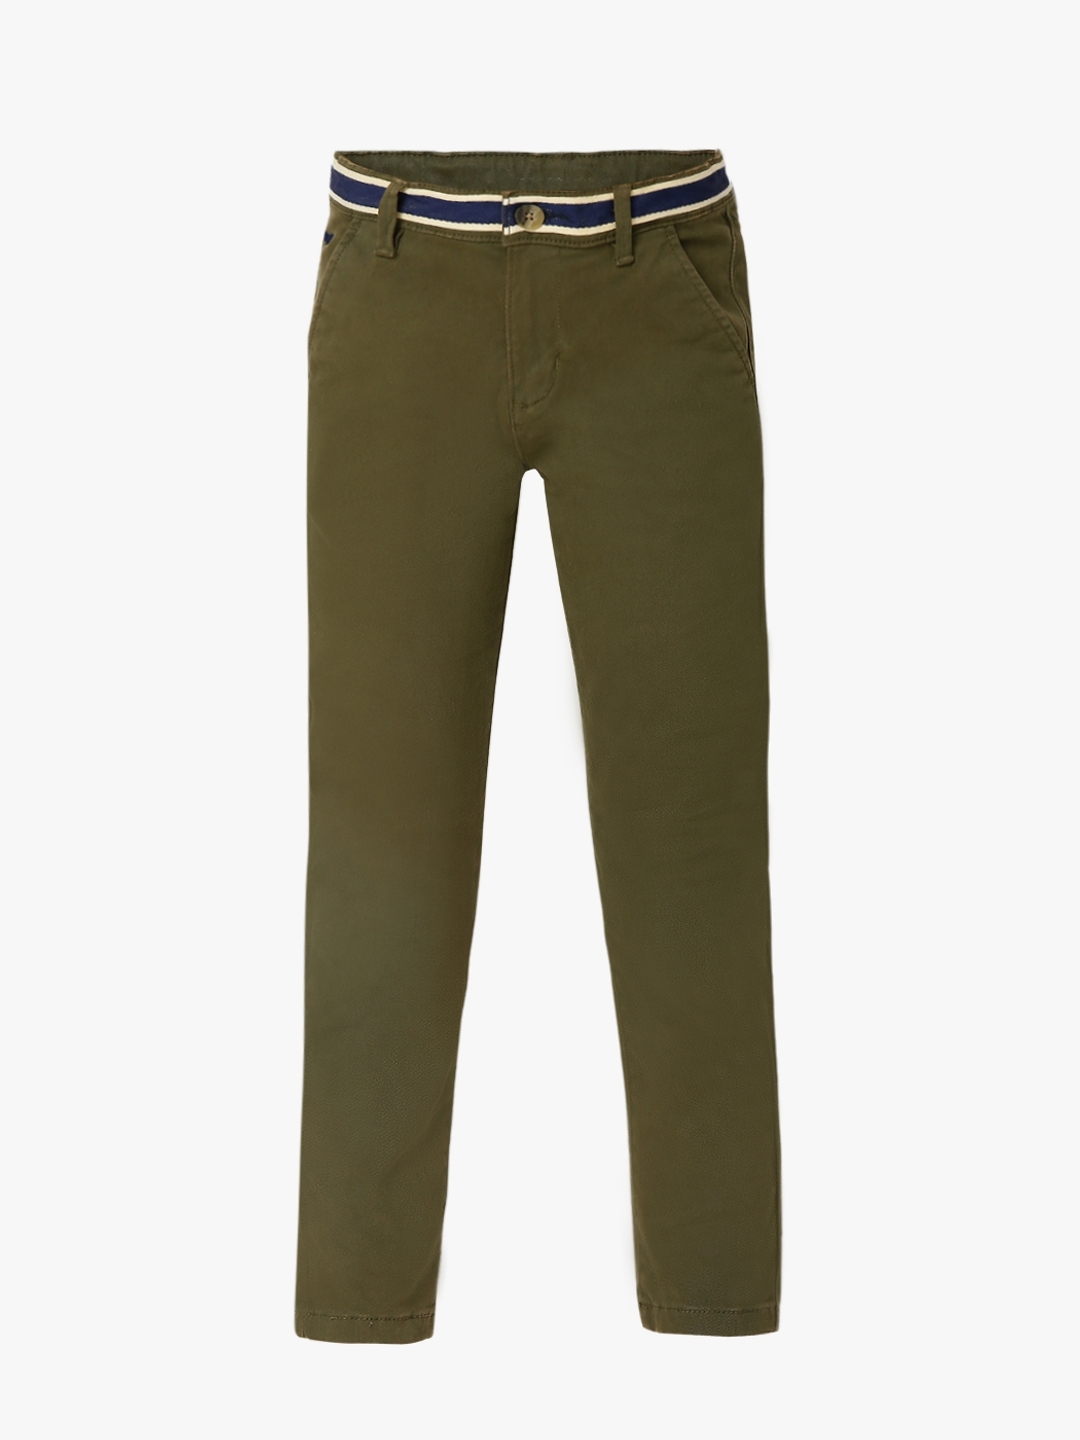 Buy TALES & STORIES Solid Cotton Blend Slim Fit Boys Trousers | Shoppers  Stop